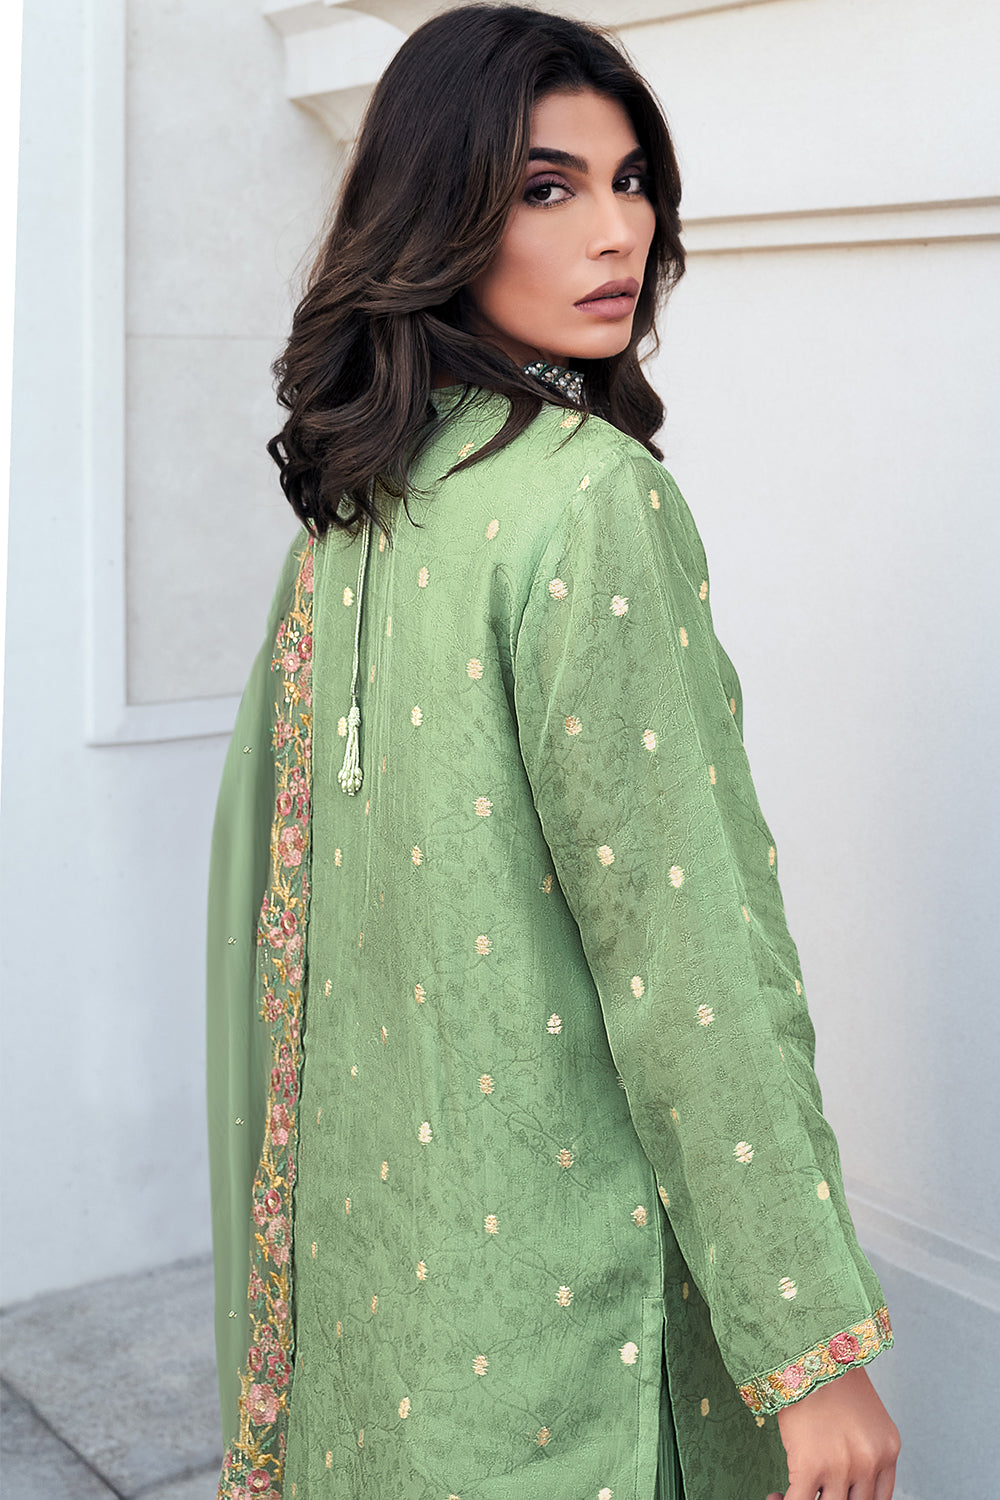 Sea Green Color Embroidered Organza Unstitched Suit Material